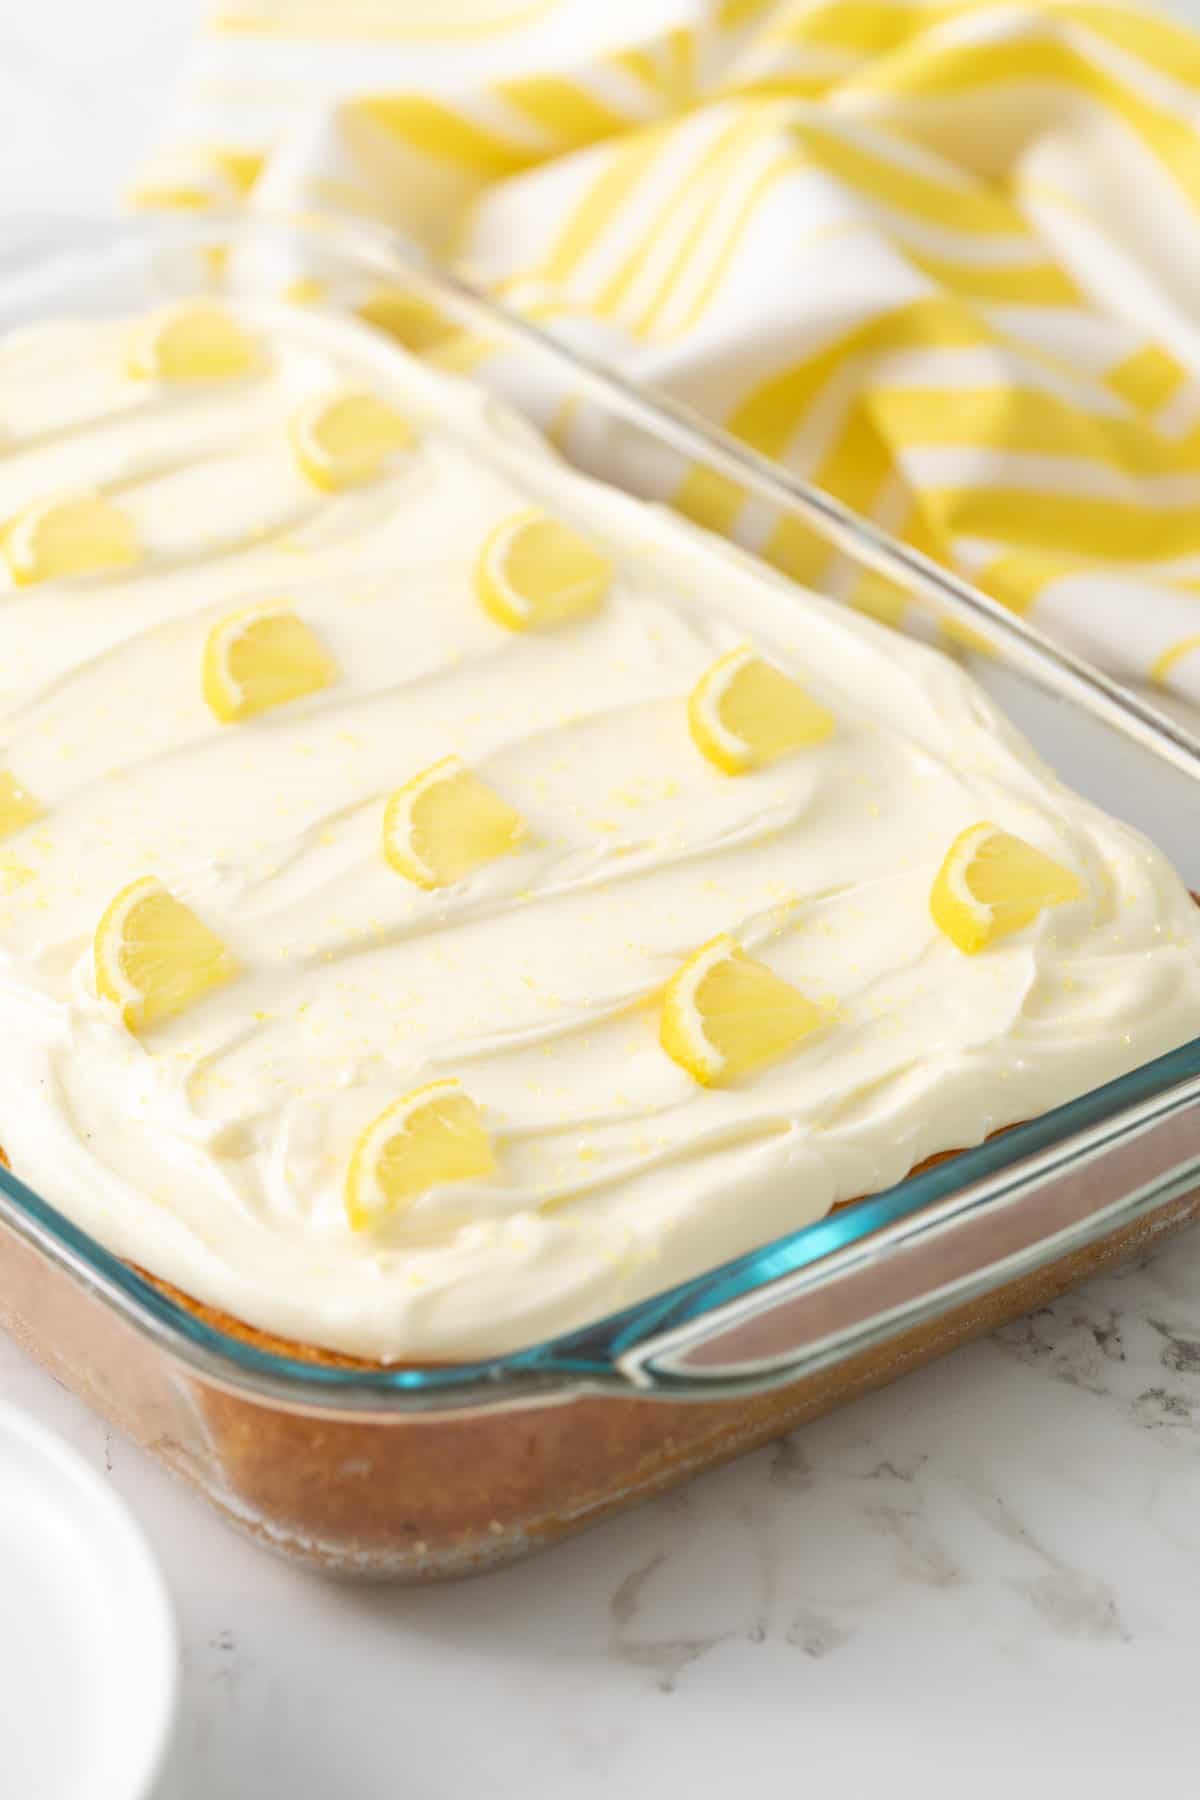 A frosted lemon sheet cake decorated with lemon slices and yellow sugar.